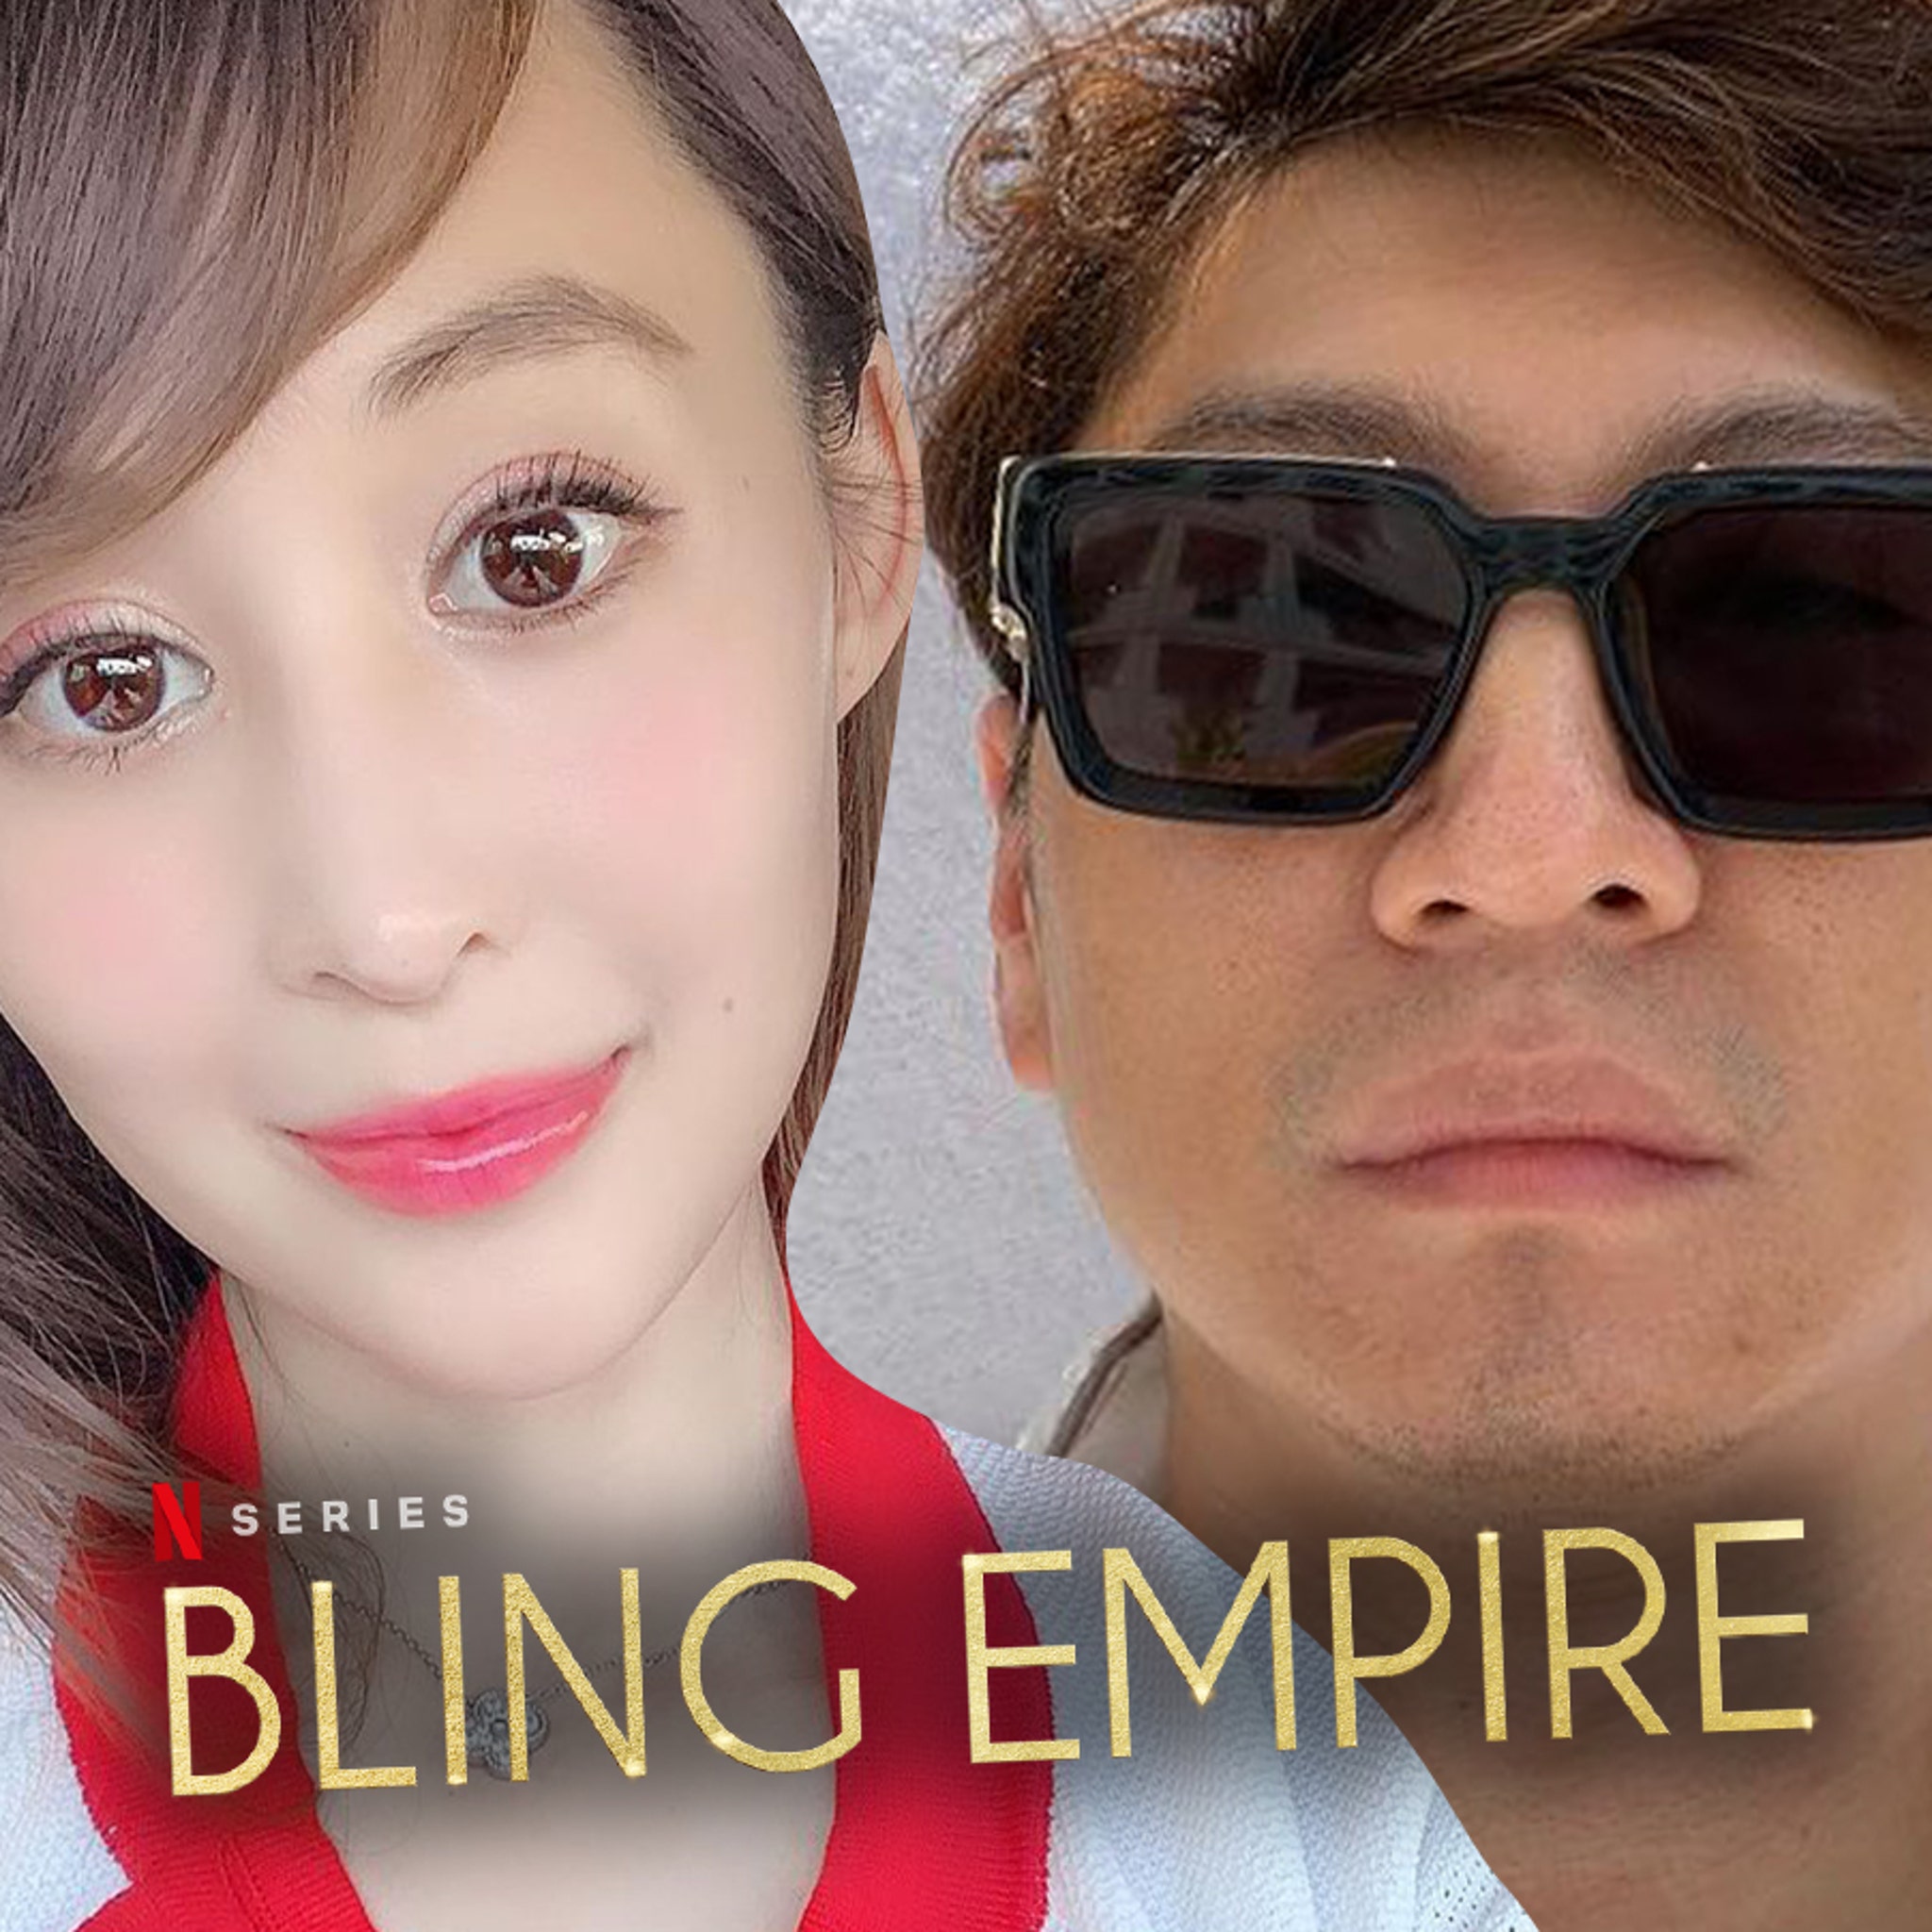 Bling Empire Cast: Where Are They Now (2021)